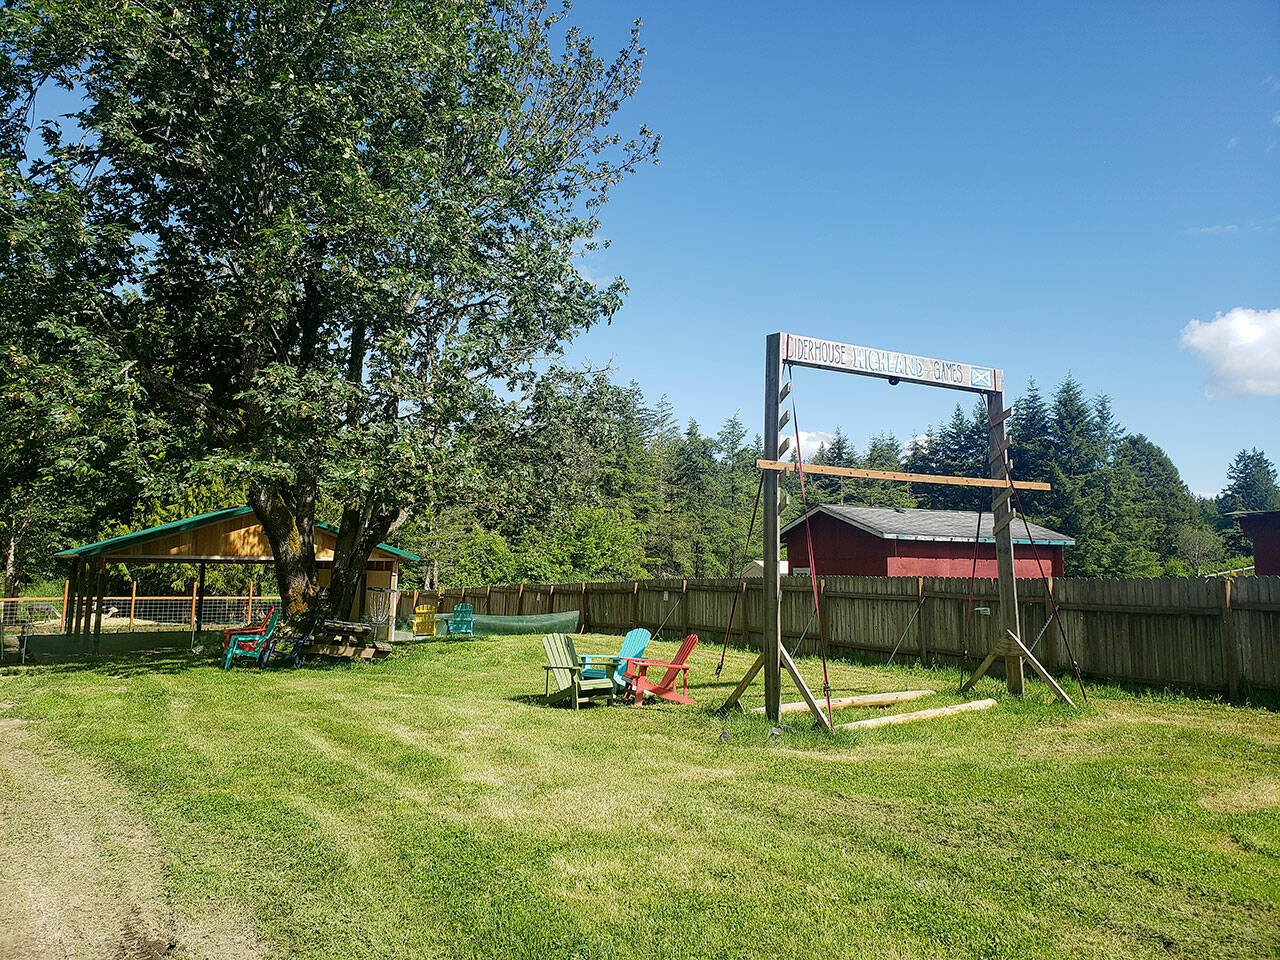 The designated outside play area for children and other events.